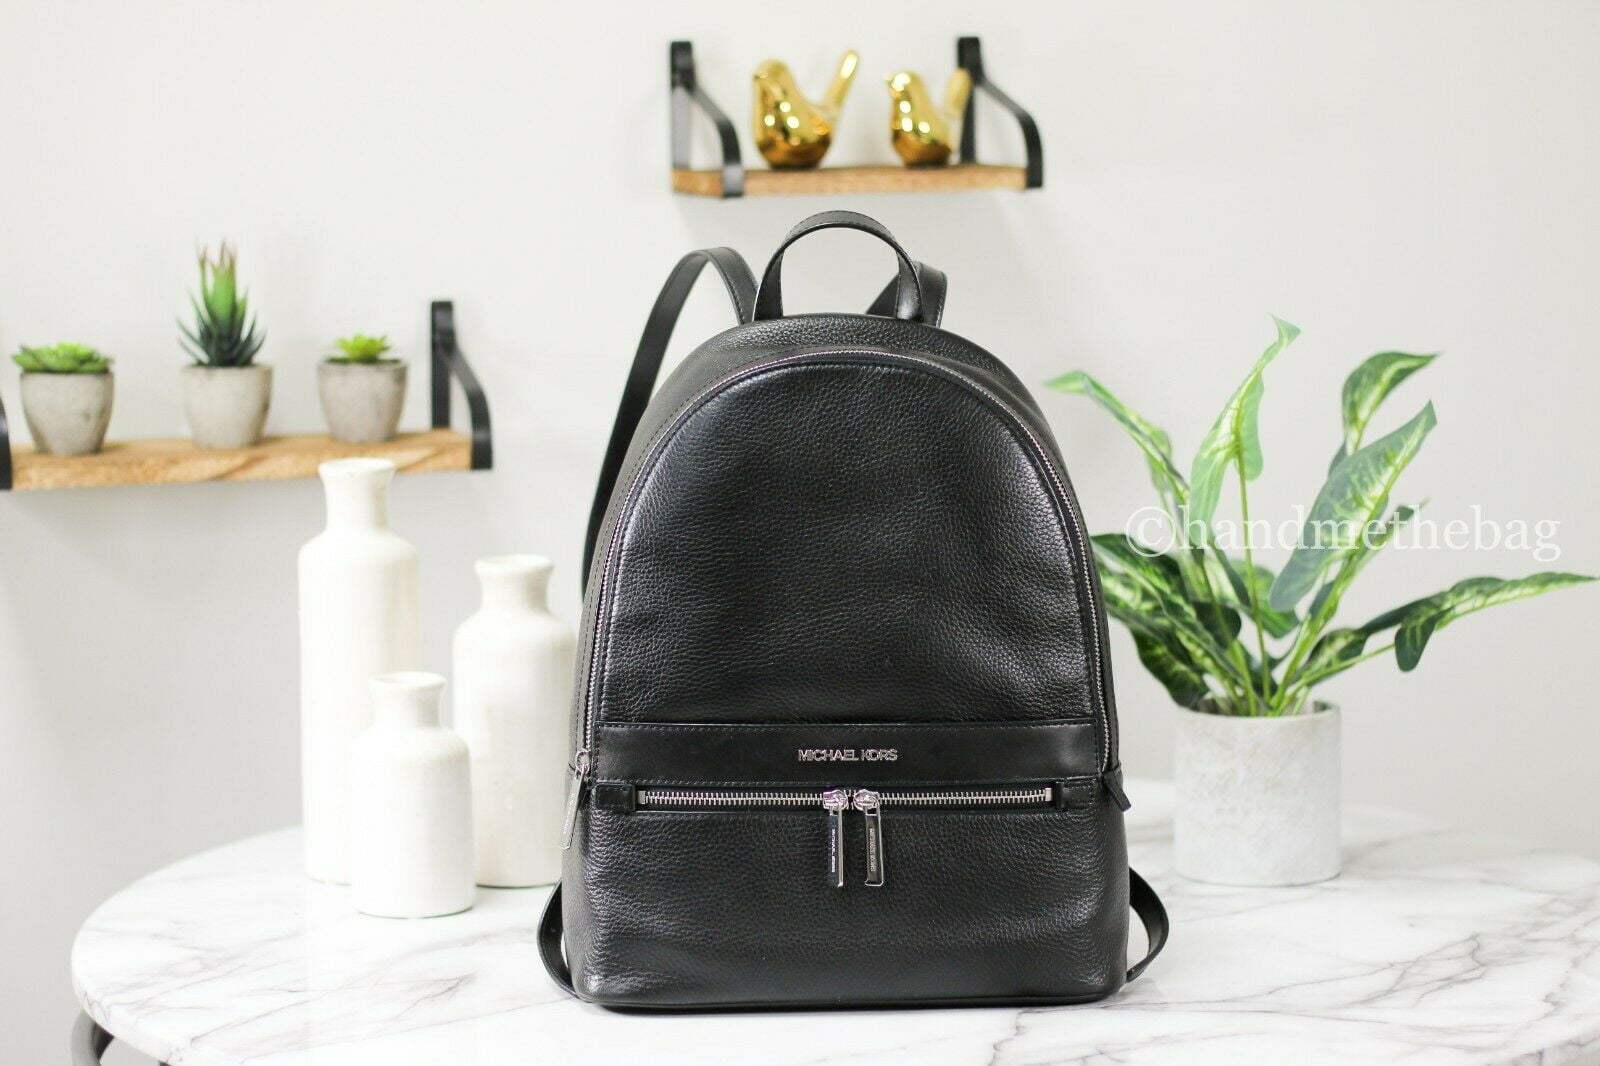 Leather backpack Michael Kors Black in Leather - 31401429